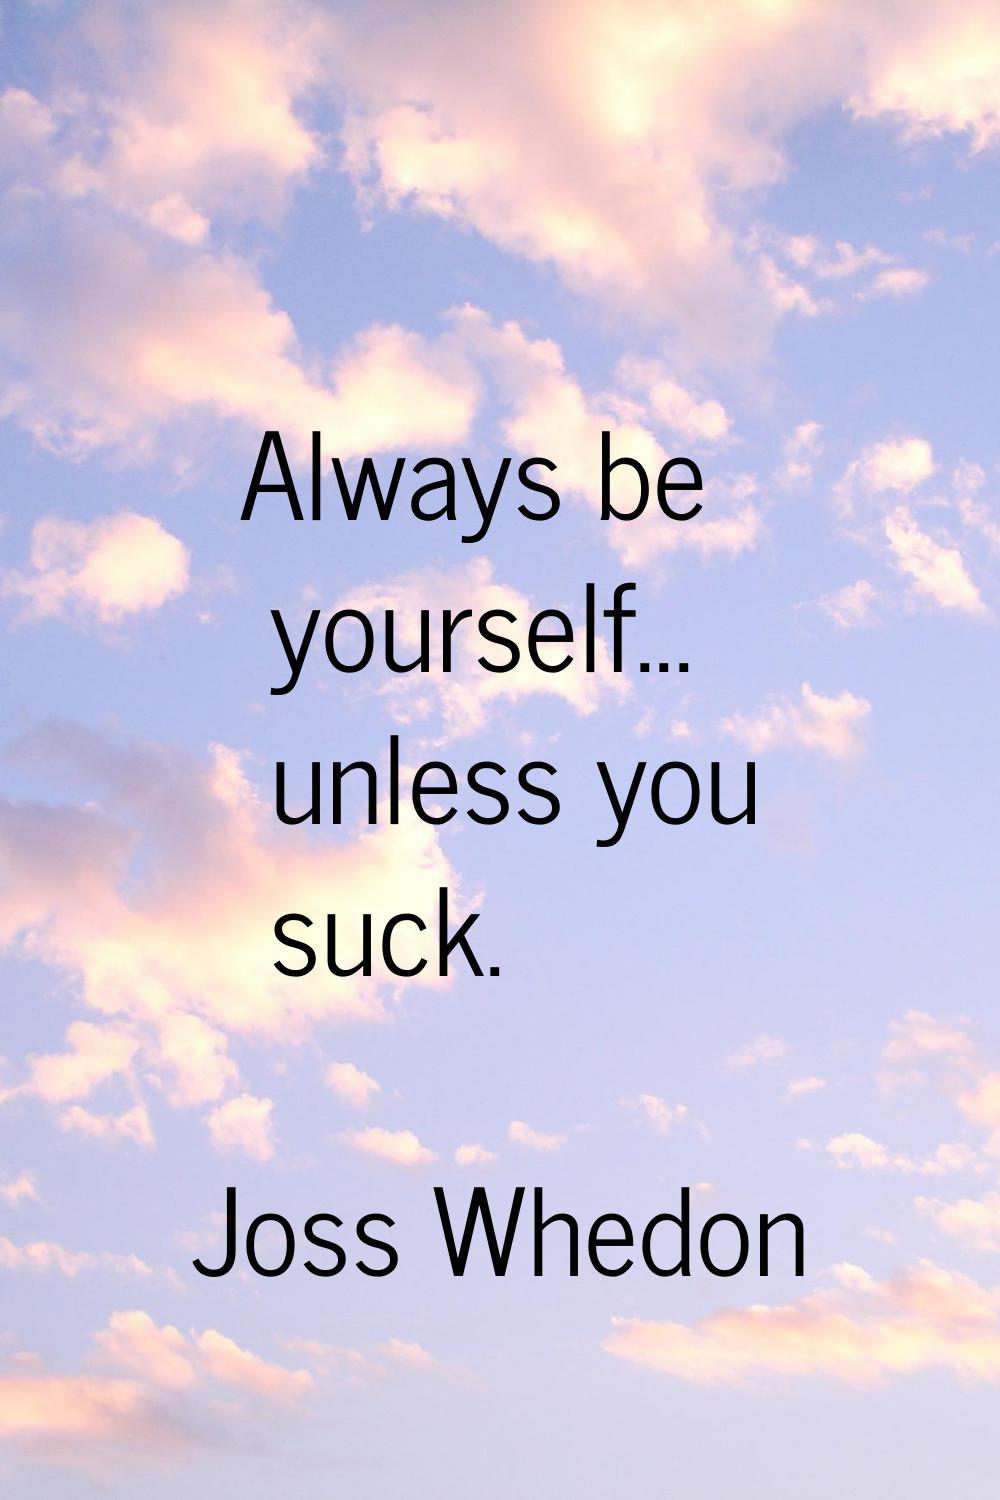 Always be yourself... unless you suck.